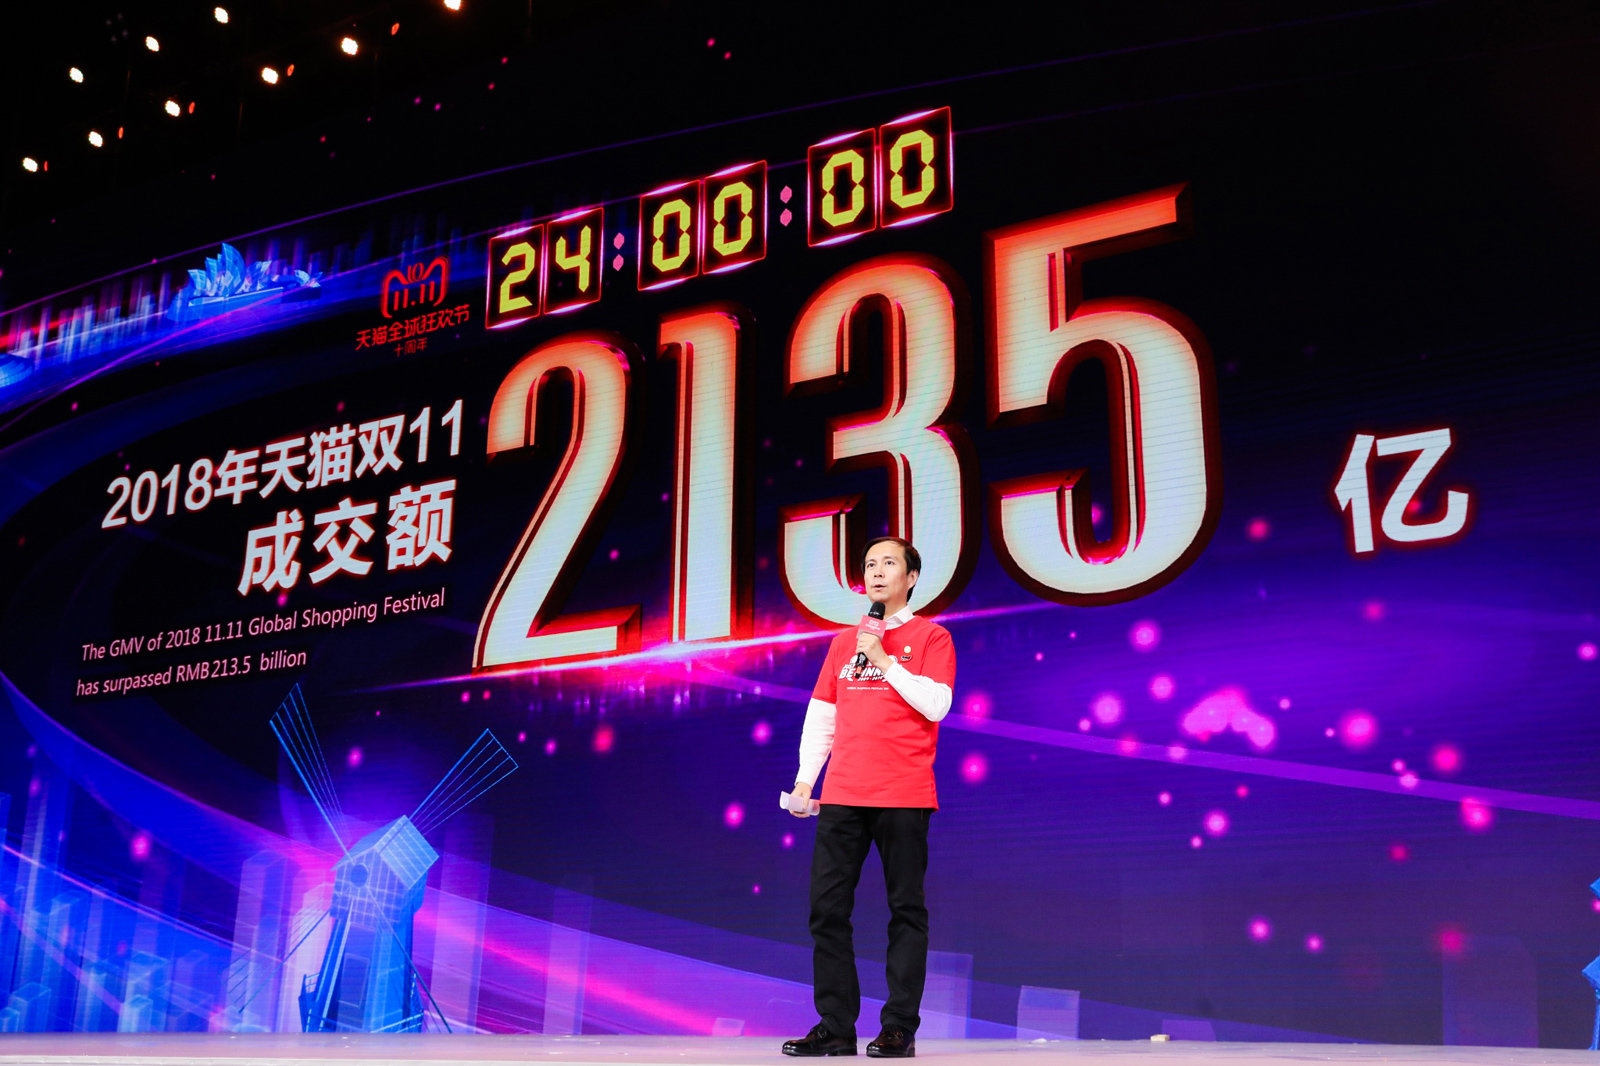 Alibaba's shopping event sales hit $1 billion in 85 seconds | DeviceDaily.com